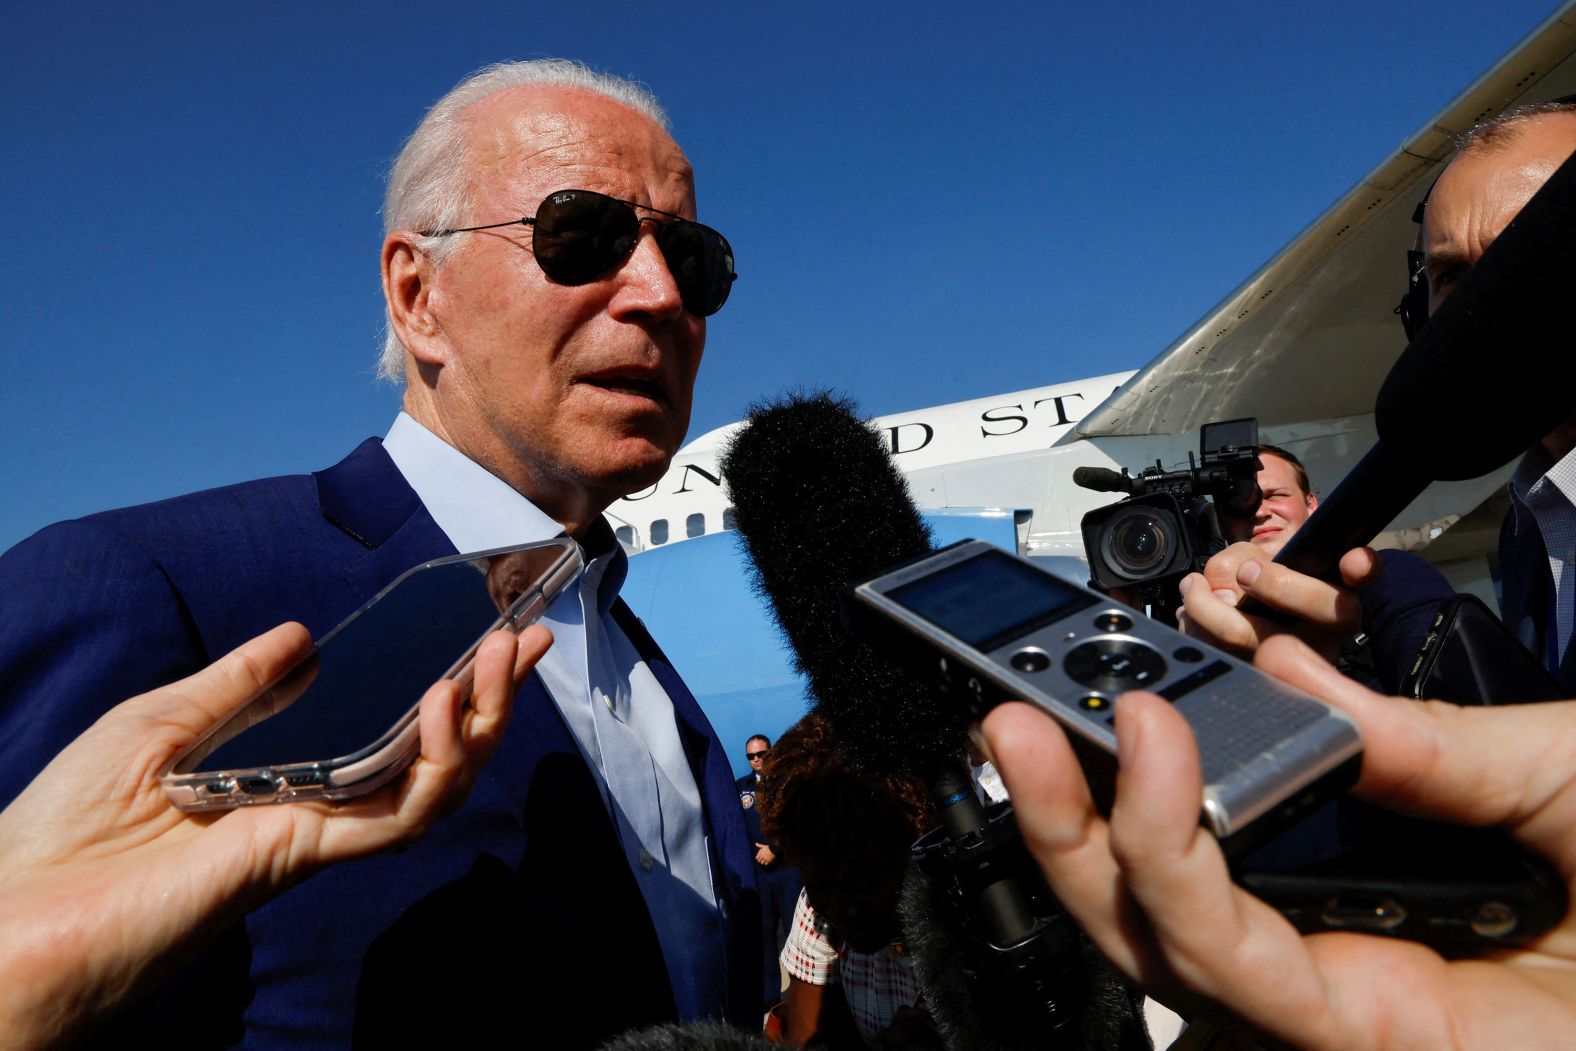 Biden speaks to the press as he arrives at Joint Base Andrews in Maryland in July 2022. The following morning, White House press secretary Karine Jean-Pierre said <a href="https://www.cnn.com/2022/07/21/politics/joe-biden-covid-19/index.html" target="_blank">the President had tested positive for Covid-19</a>.